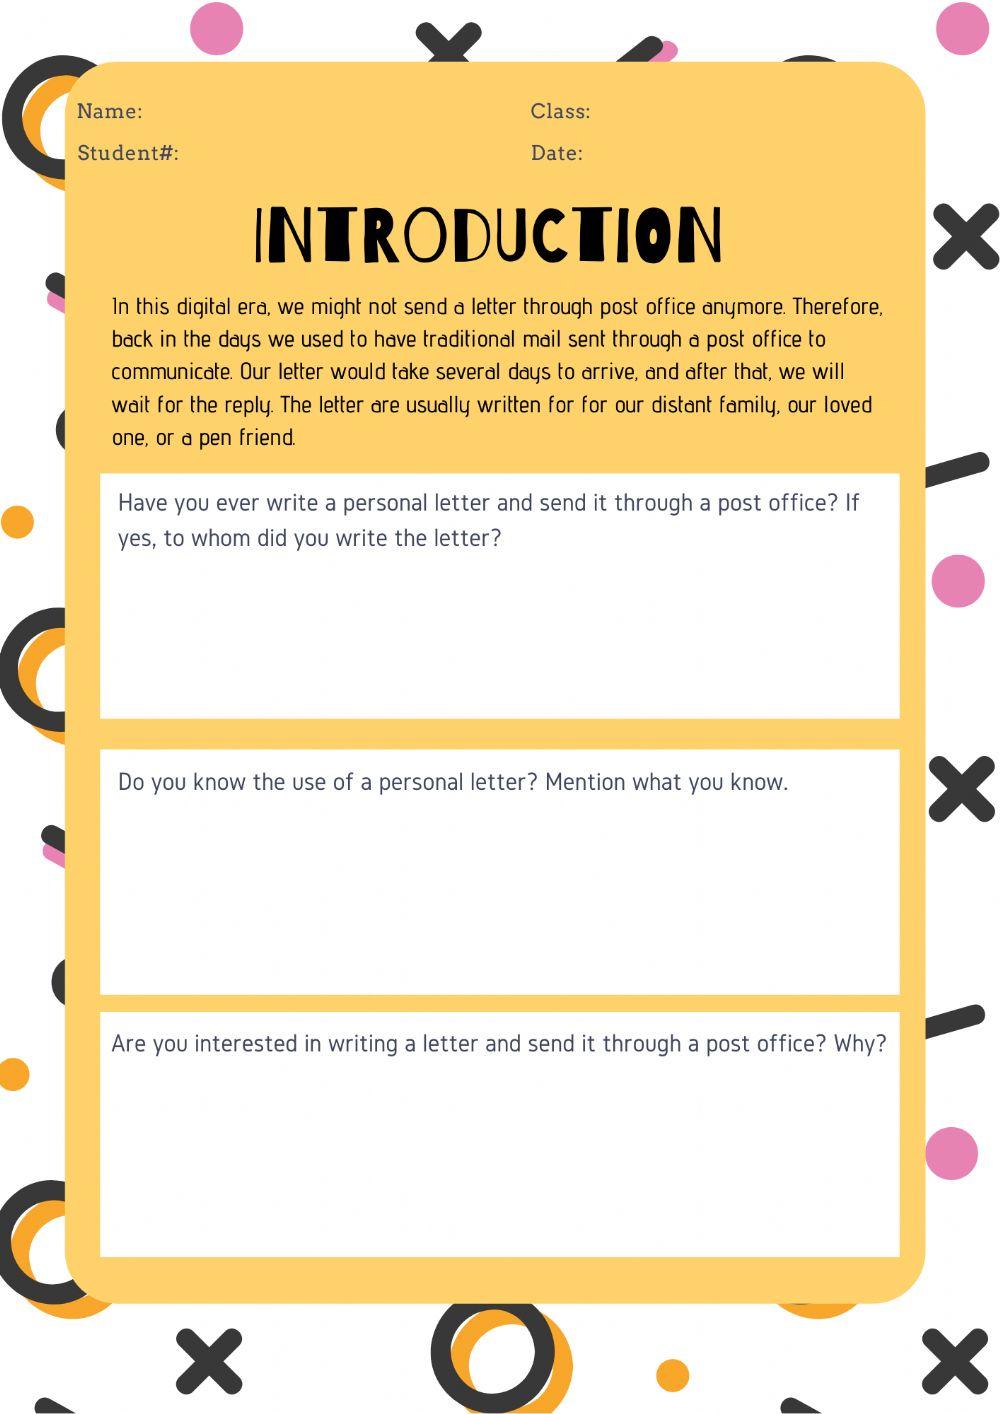 Introduction to Personal Letters